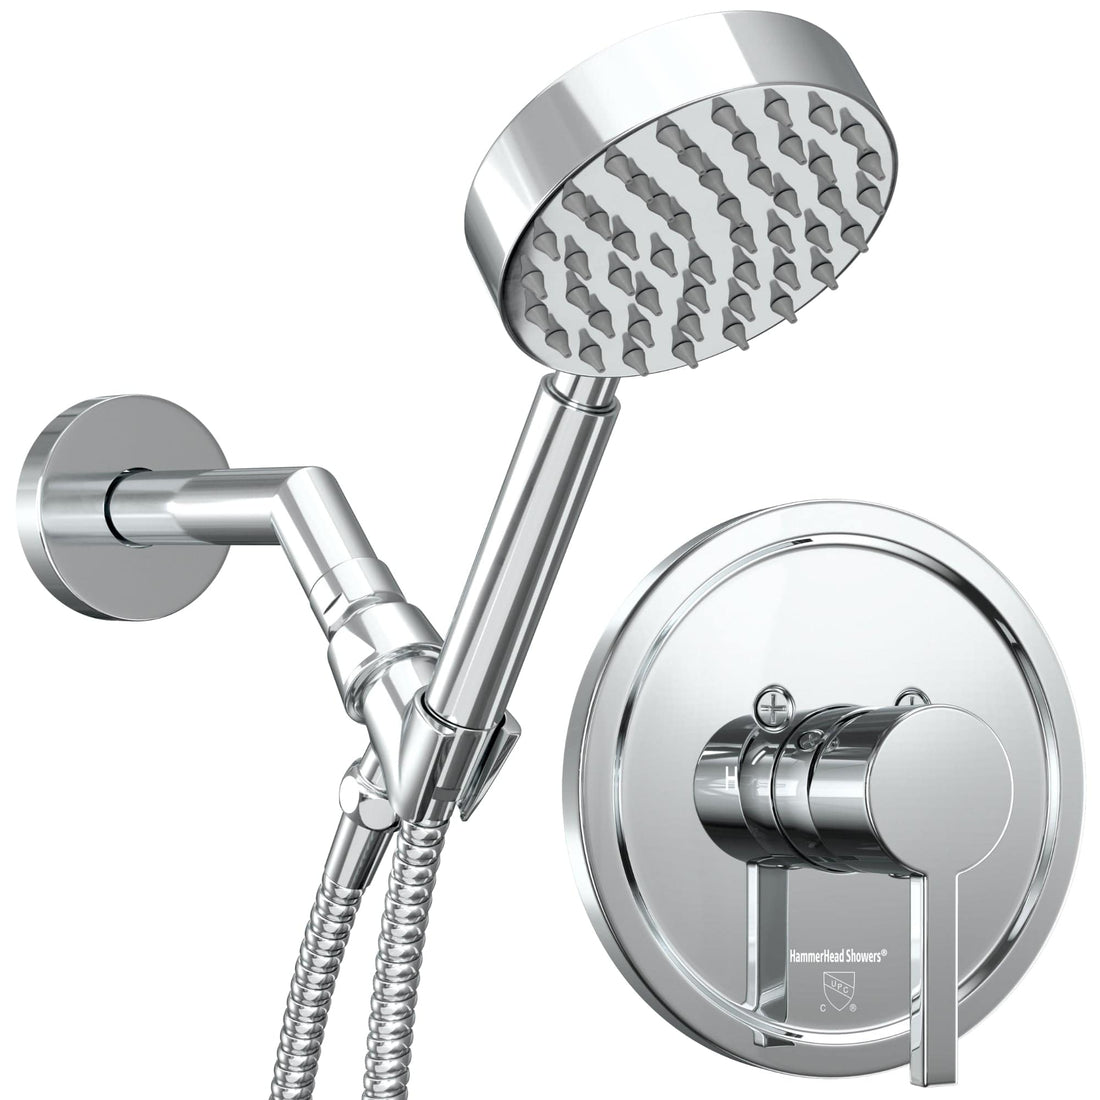 Main Image All Metal Handheld Shower Head Set - Complete Shower System with Valve and Trim Chrome2.5